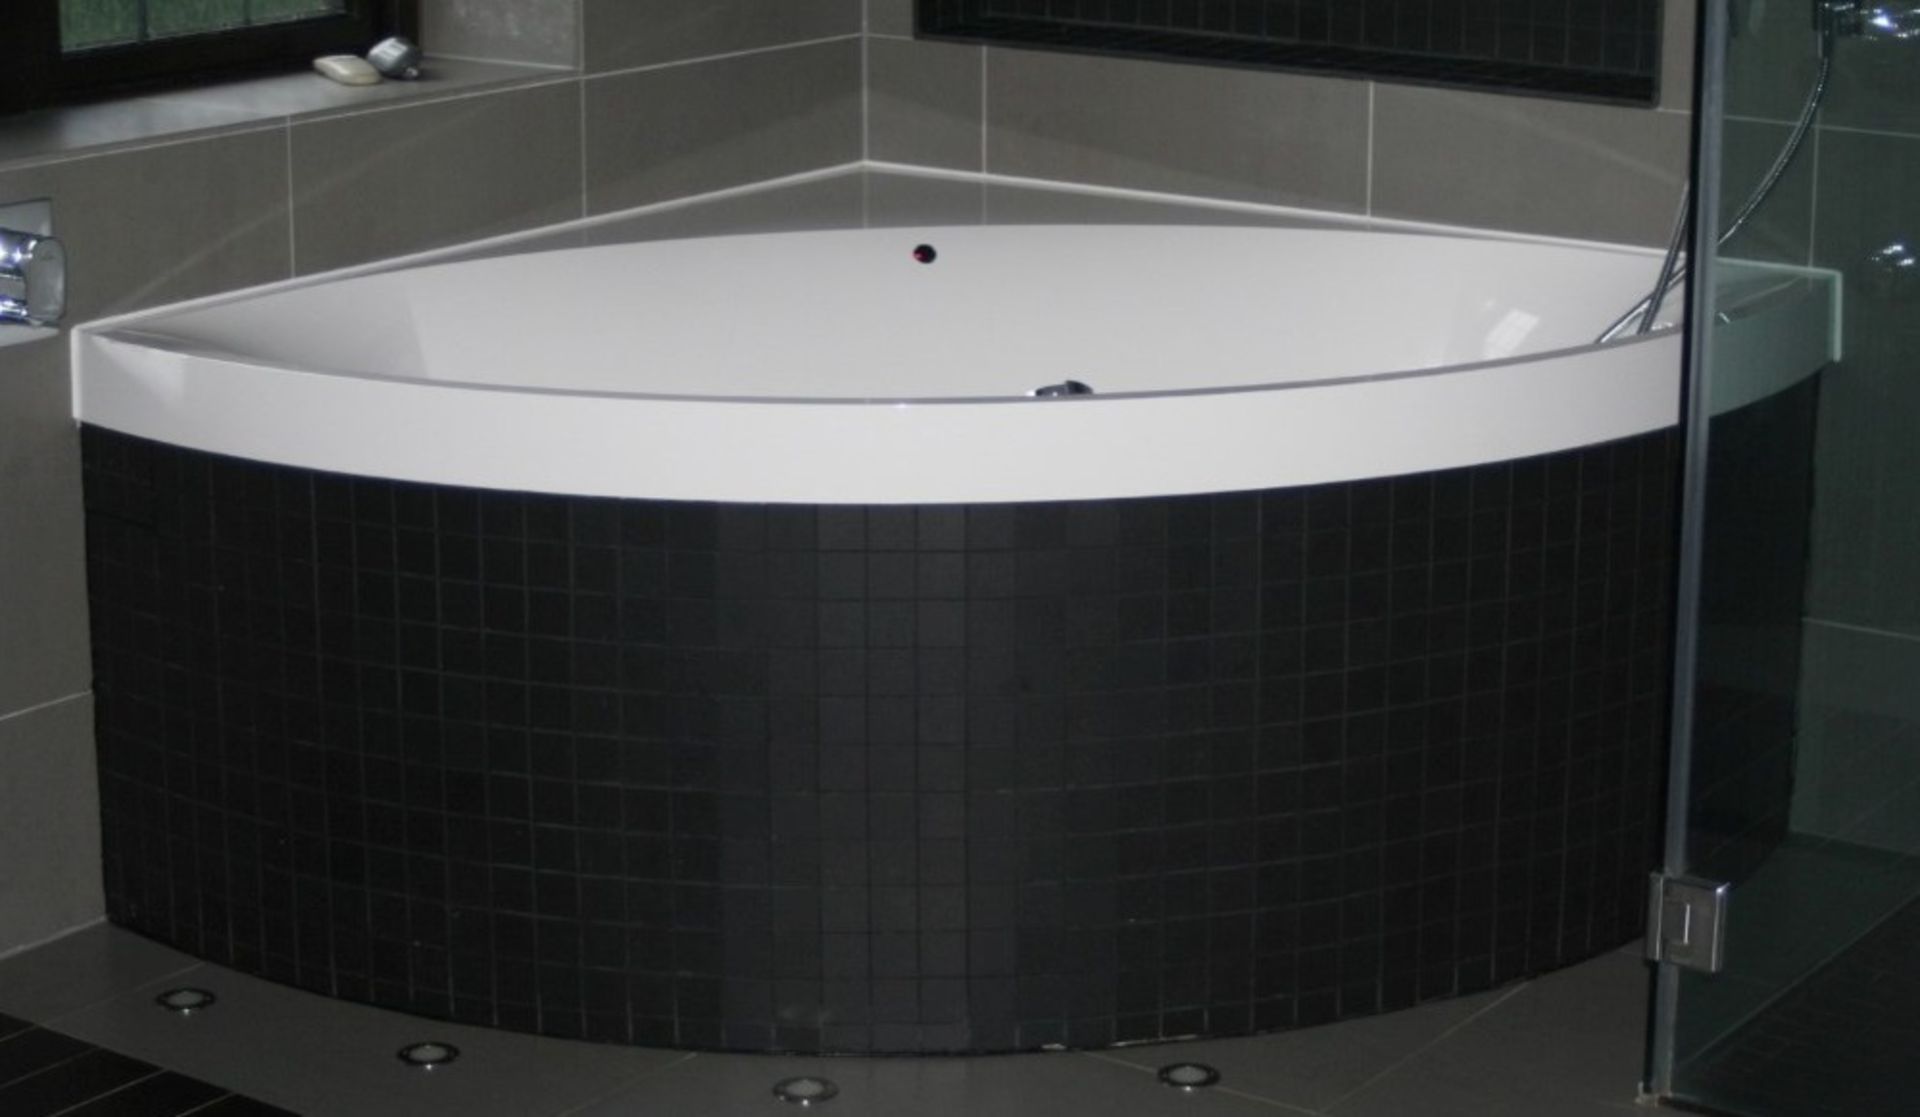 1 x Luxurious Villeroy & Boch Corner Whirlpool Bath - The Ultimate Fitness Combipool - Features 28 - Image 7 of 24